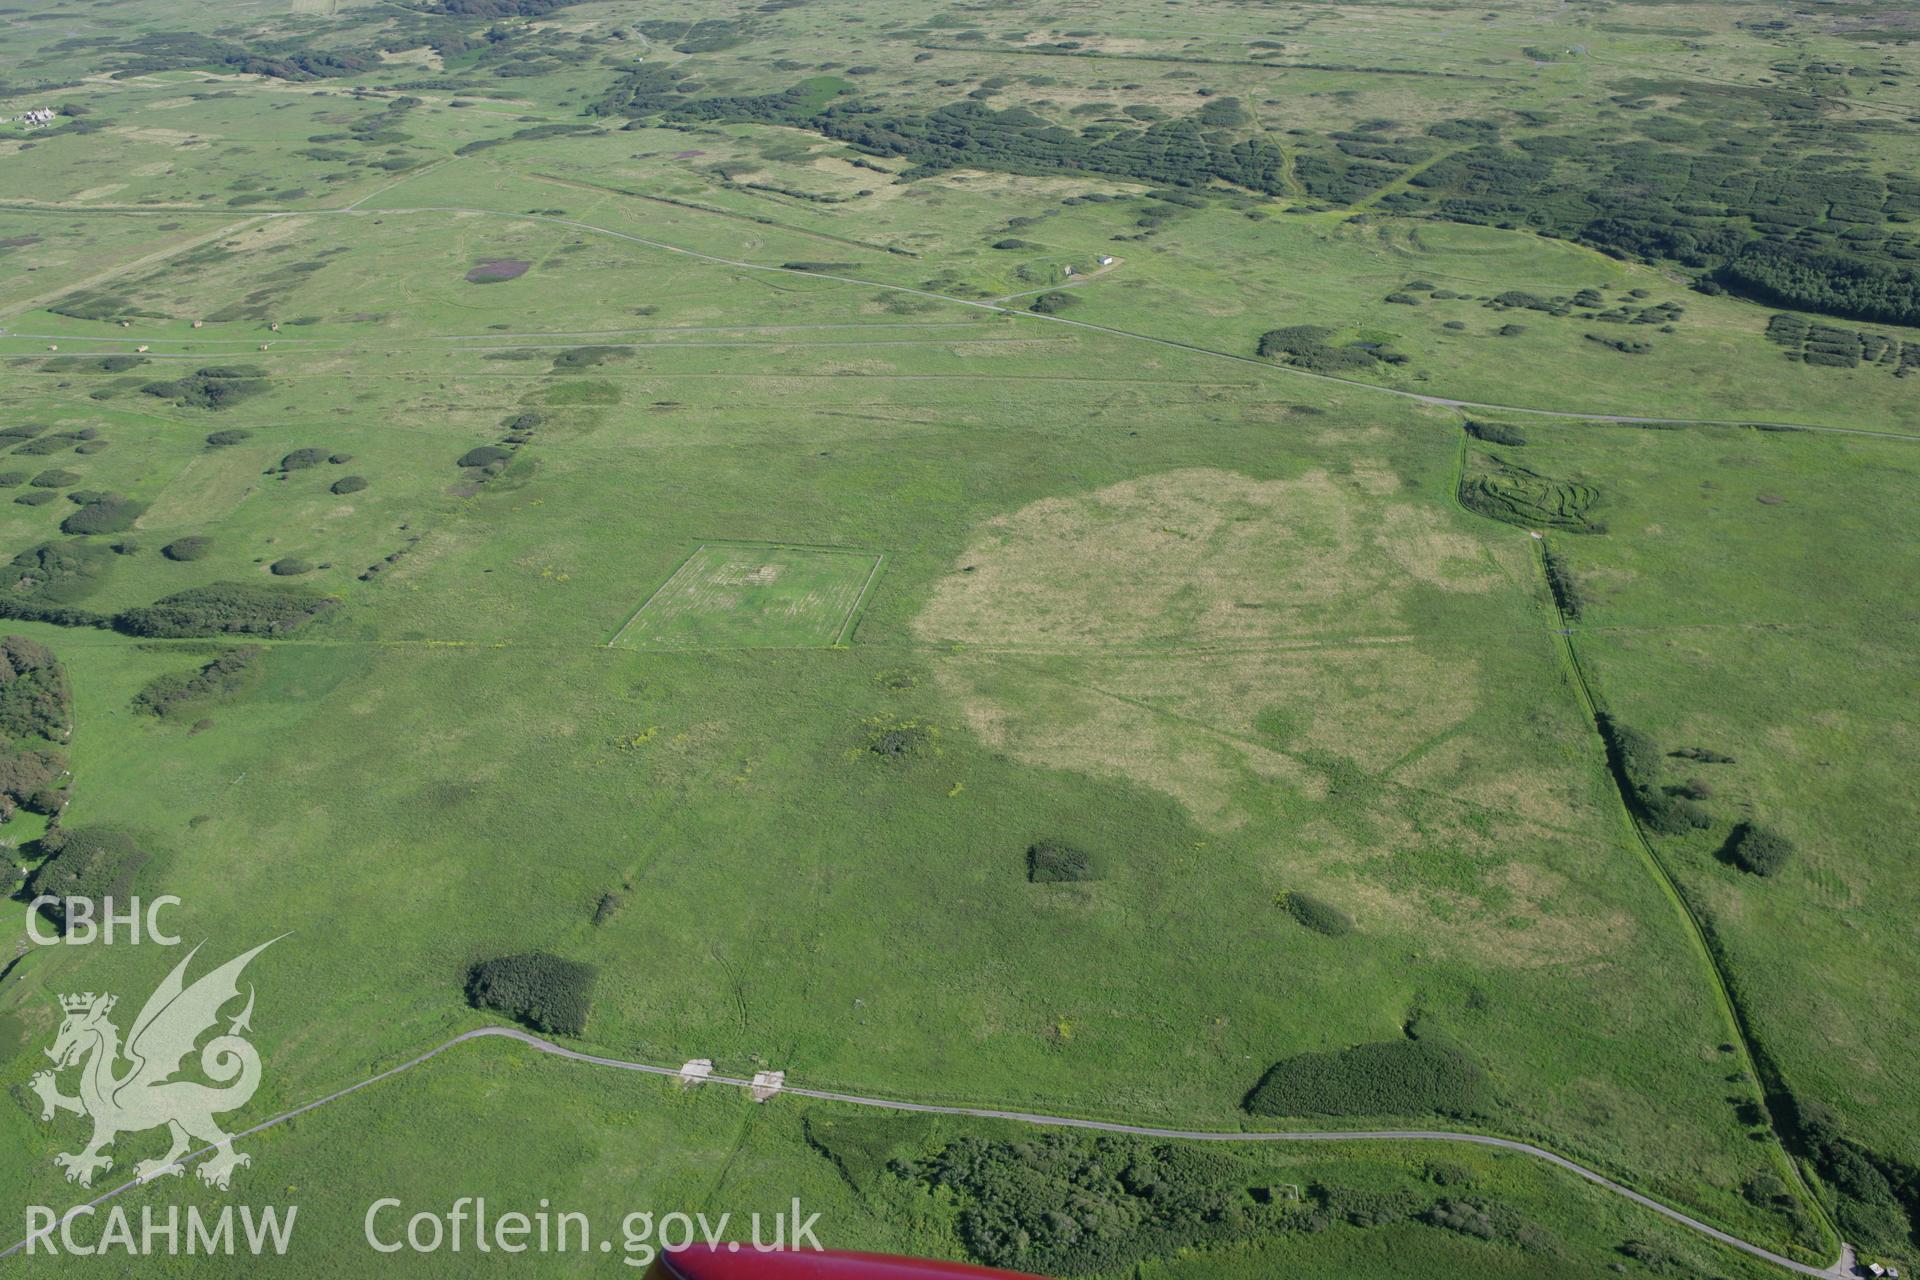 RCAHMW colour oblique aerial photograph of Brownslade Round Barrow, Castlemartin, and surrounding landscape. Taken on 30 July 2007 by Toby Driver